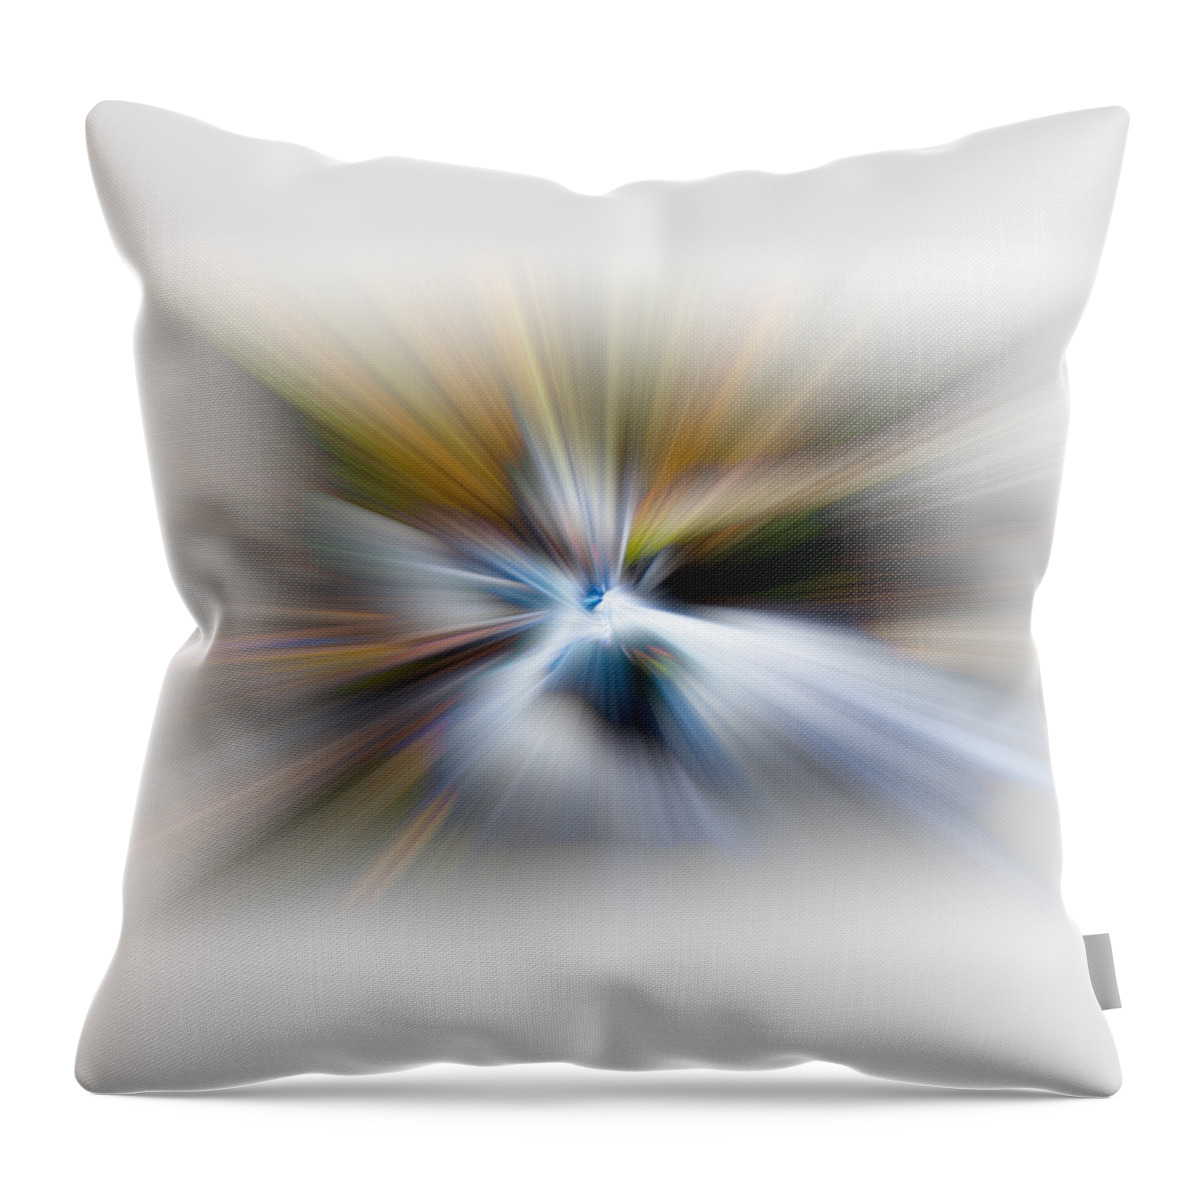 Abstract Throw Pillow featuring the photograph Light Angels by Debra and Dave Vanderlaan